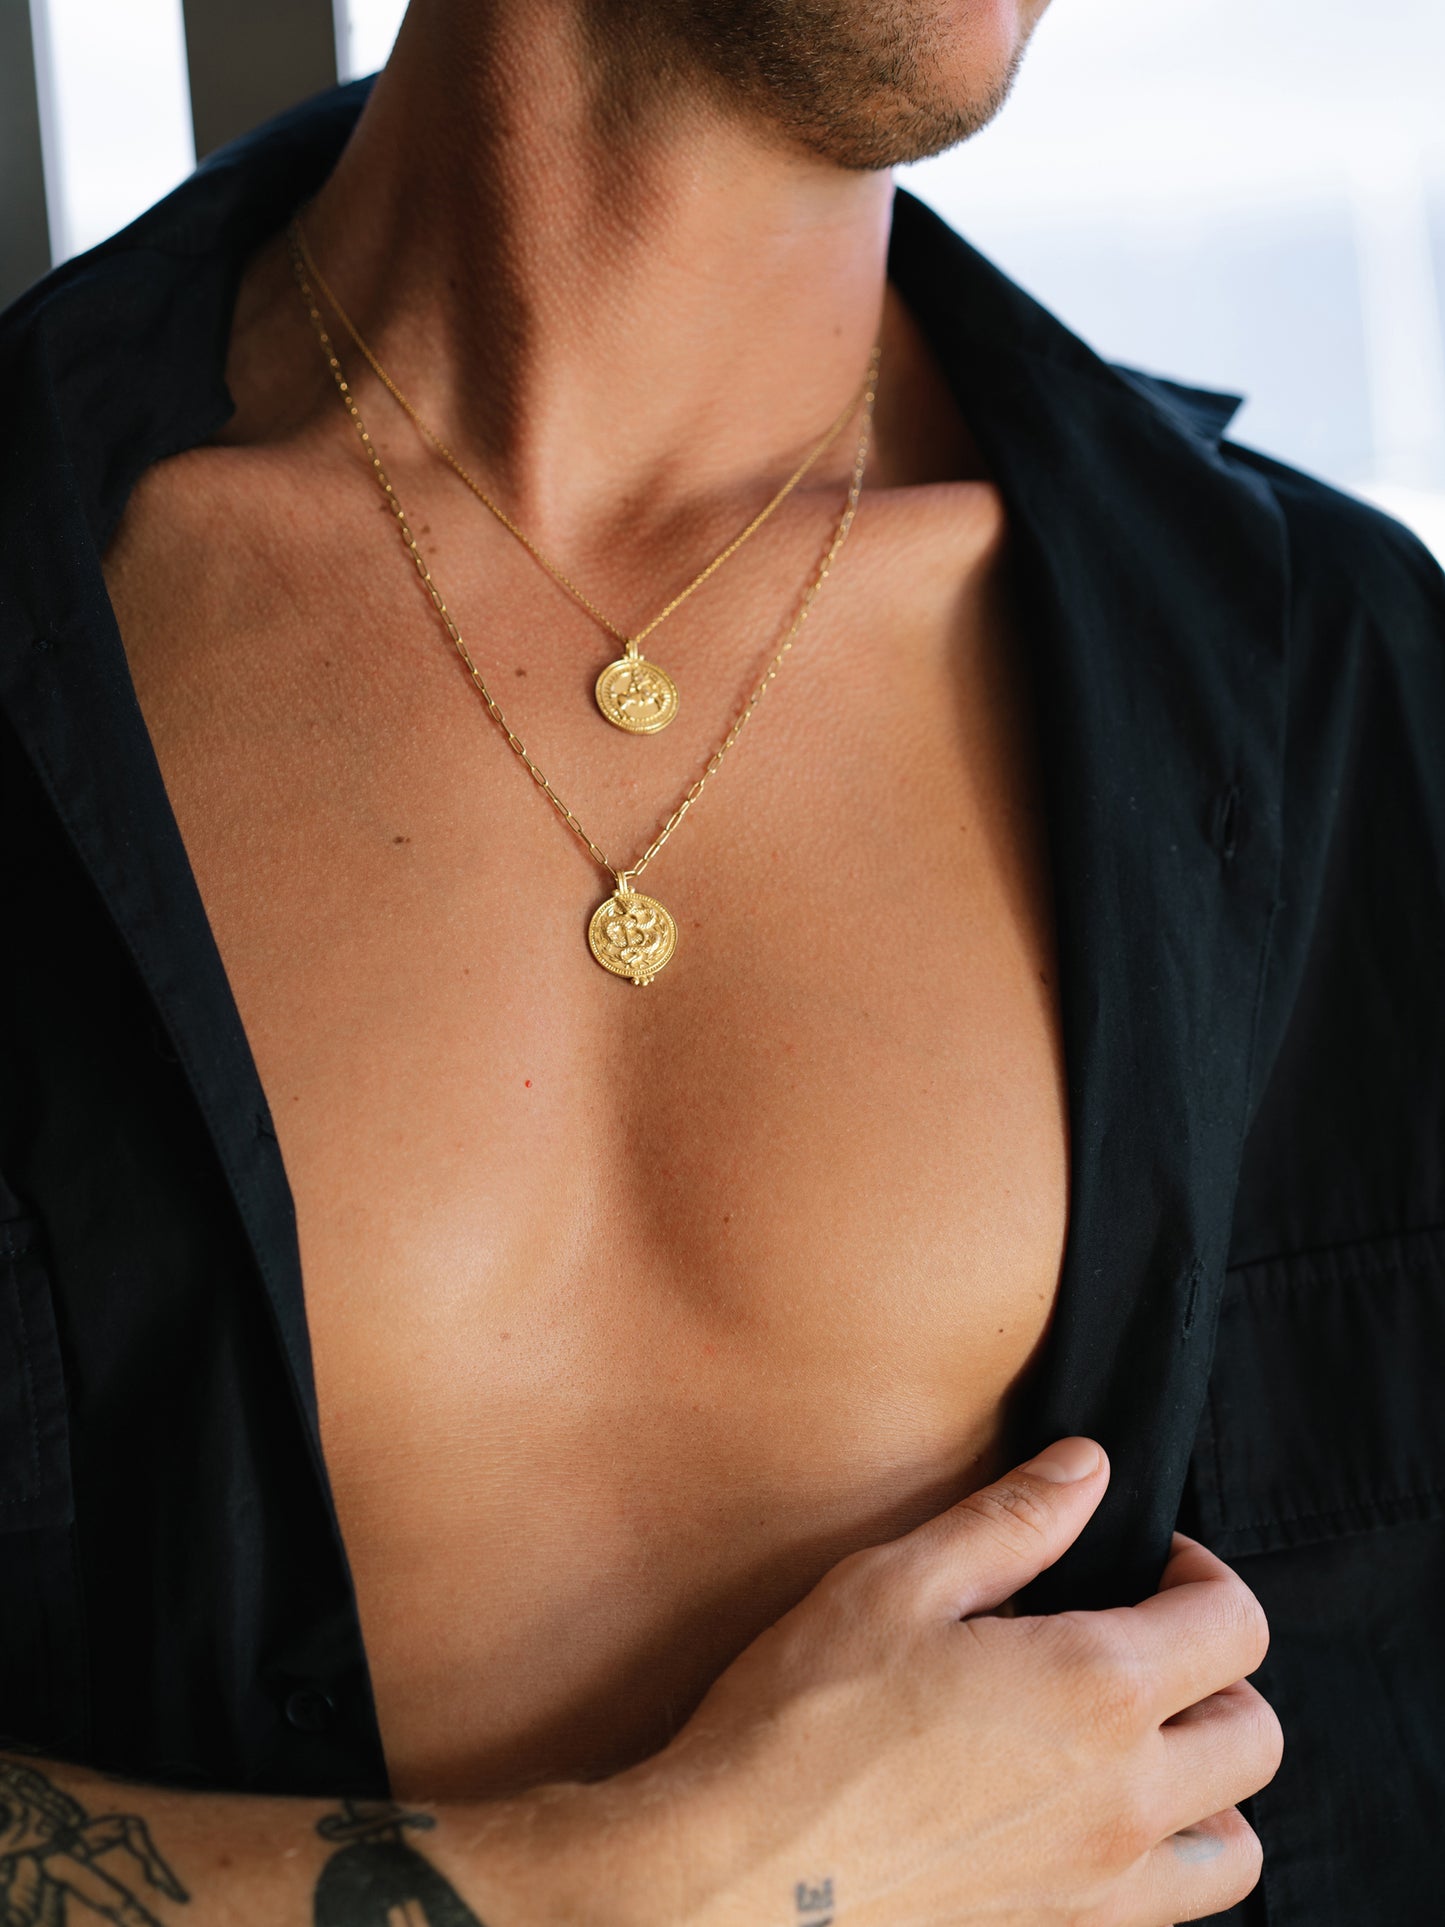 Sagittarius. 18ct Solid Gold Star Sign Necklace. The pendant features an Evil Eye on the back to ward off any naughty behavior aimed at you, Our logo and the 750 Hallmark for 18ct Gold.